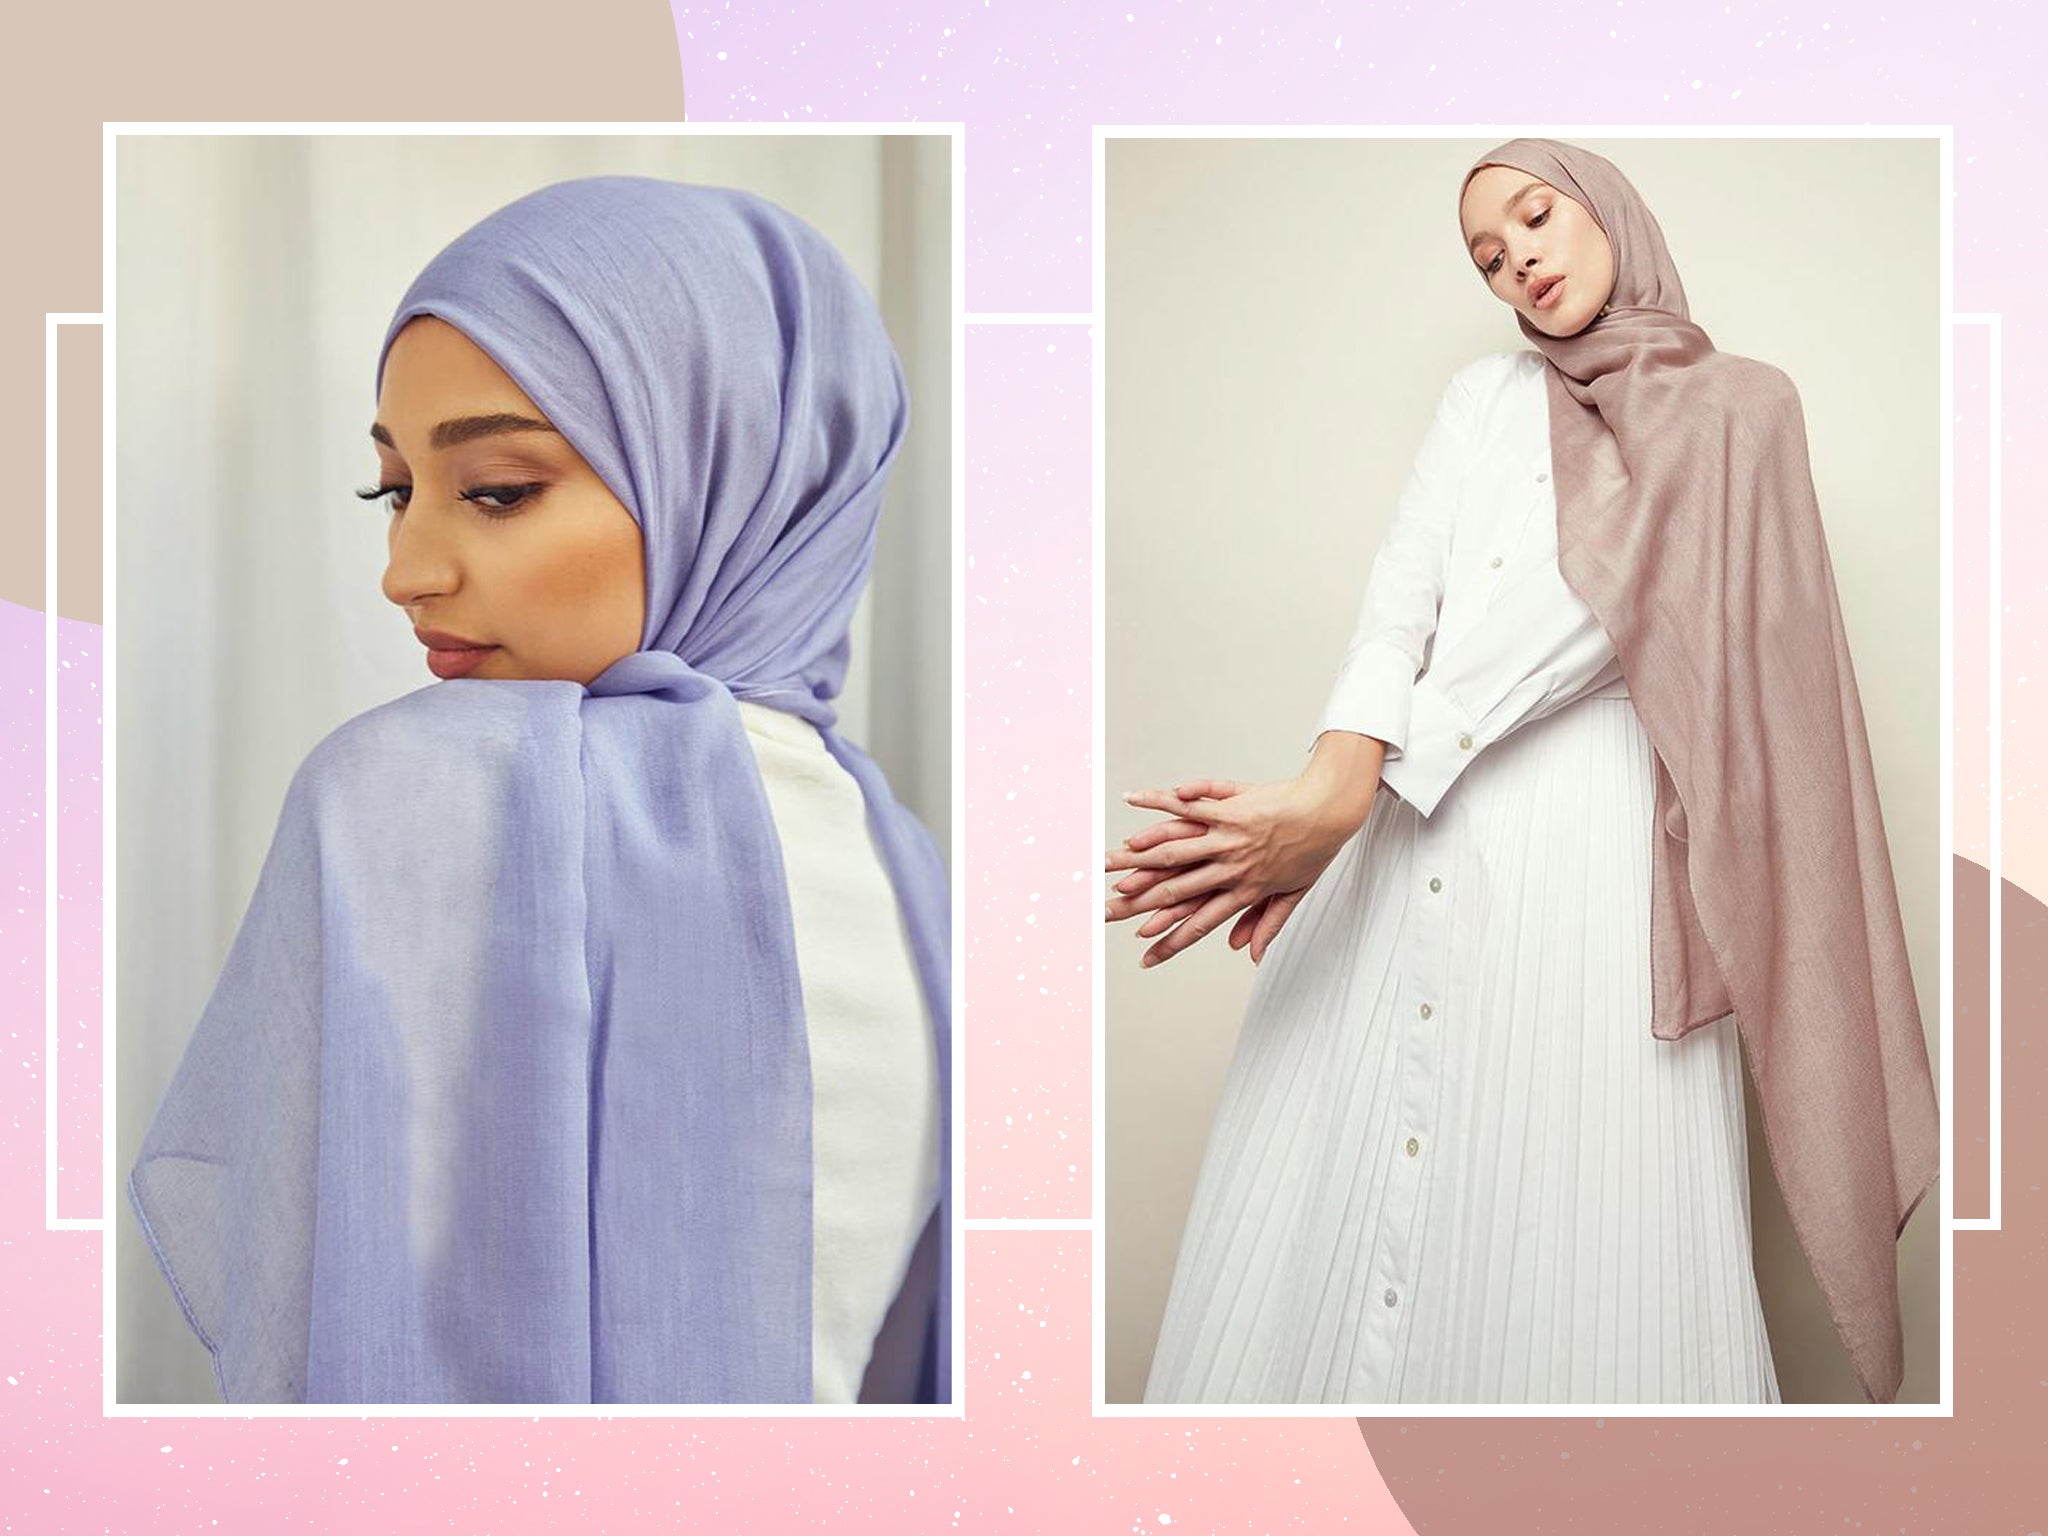 Effortlessly trendy and versatile, our top picks can be worn in a turban style or tied down over the shoulder